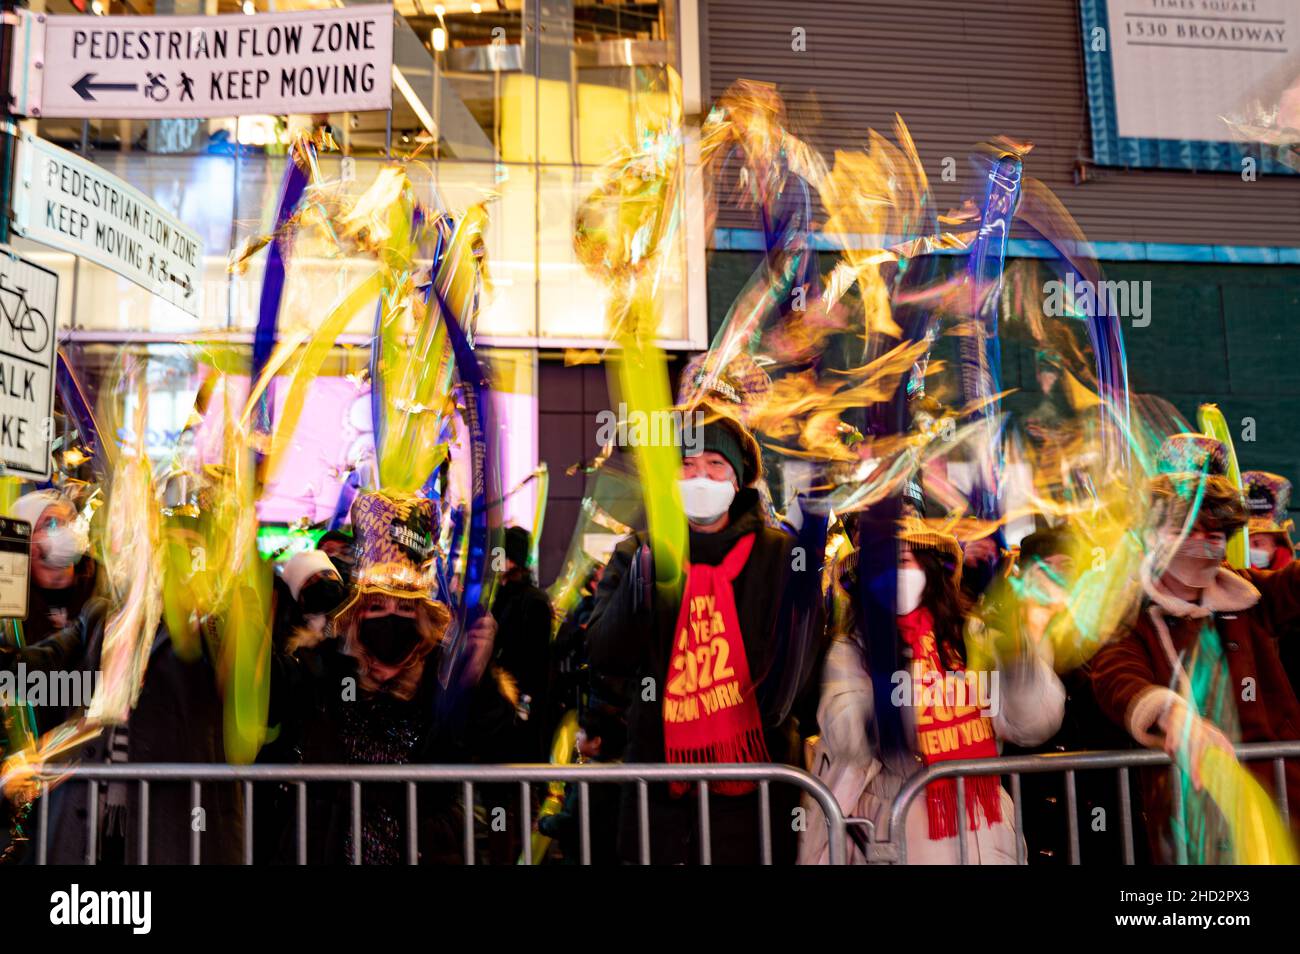 New York, USA. 31st Dec, 2021. People wave thundersticks during Times Square New Year’s Eve celebrations in New York, USA. Credit: Chase Sutton/Alamy Live News Stock Photo